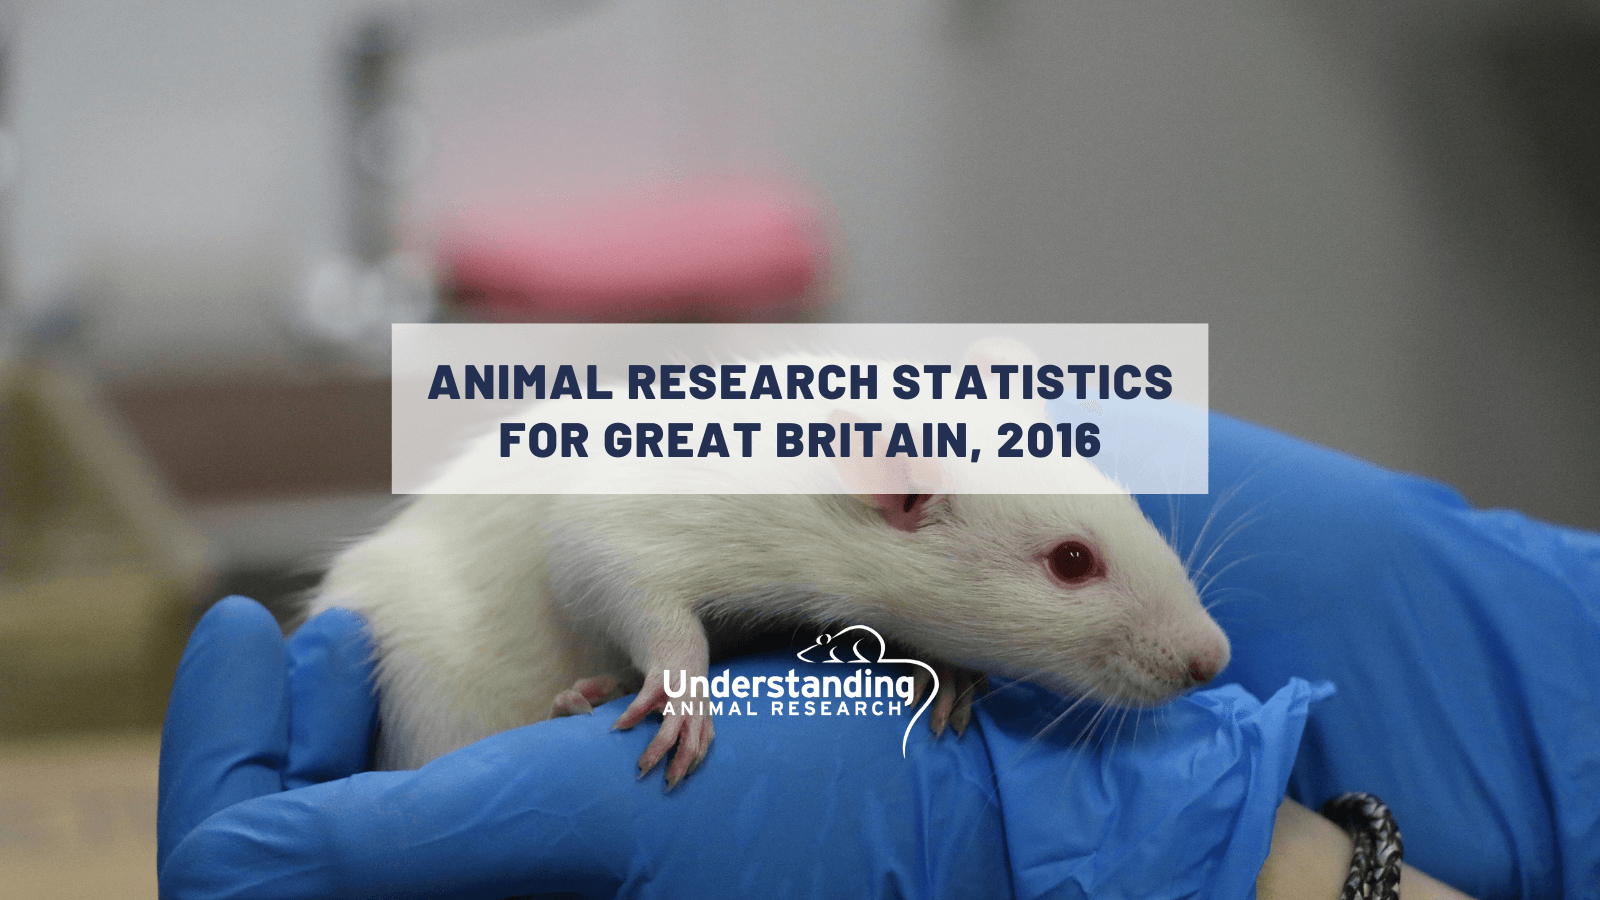 Animal research statistics for Great Britain, 2016